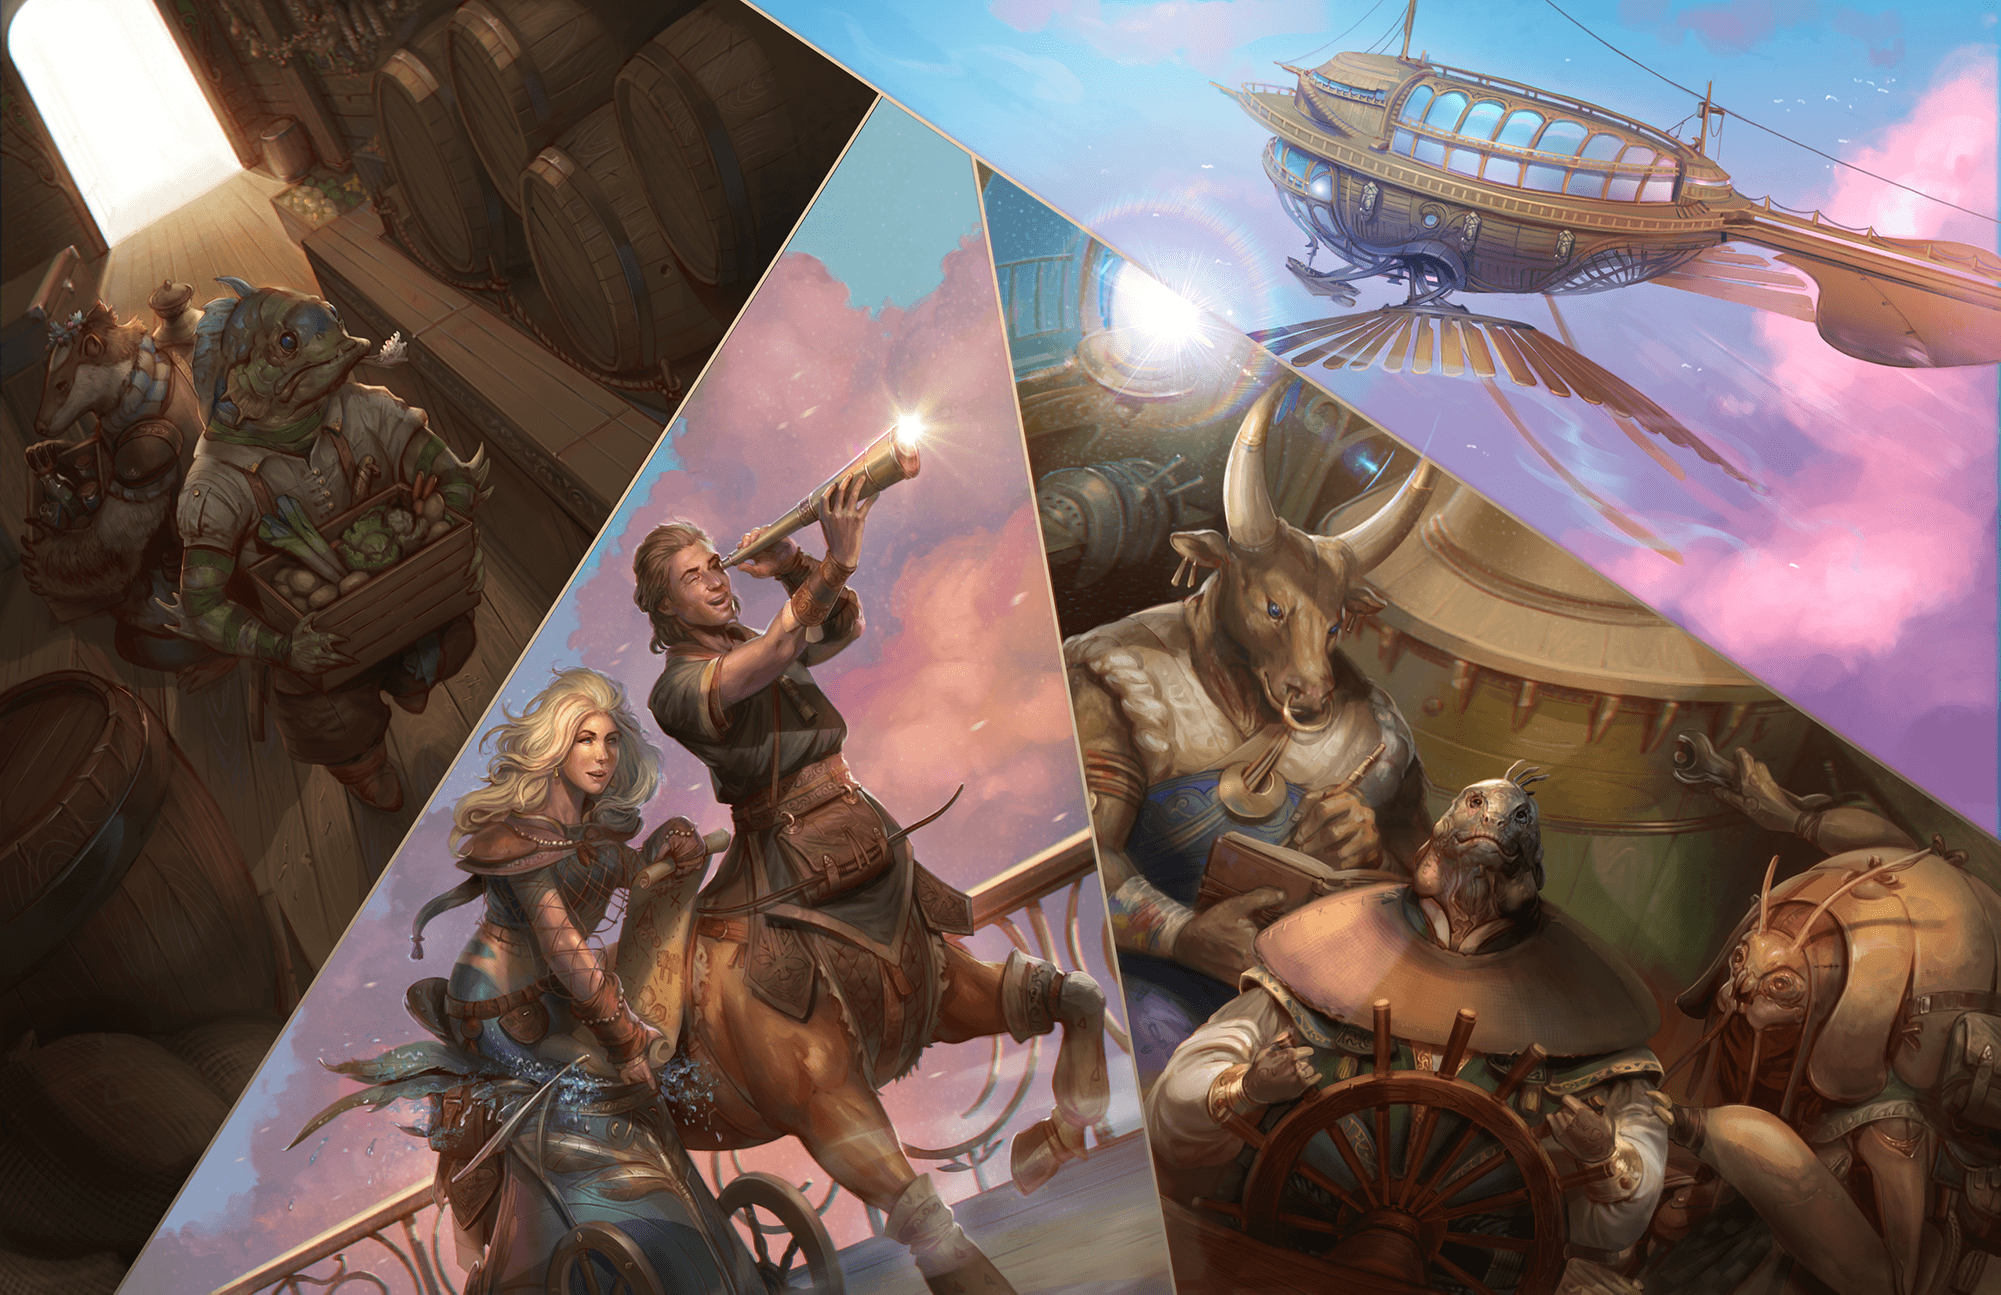 Combined illustrations of the crew setting off on their grand journey around Golarion! Art by Mirco Paganessi